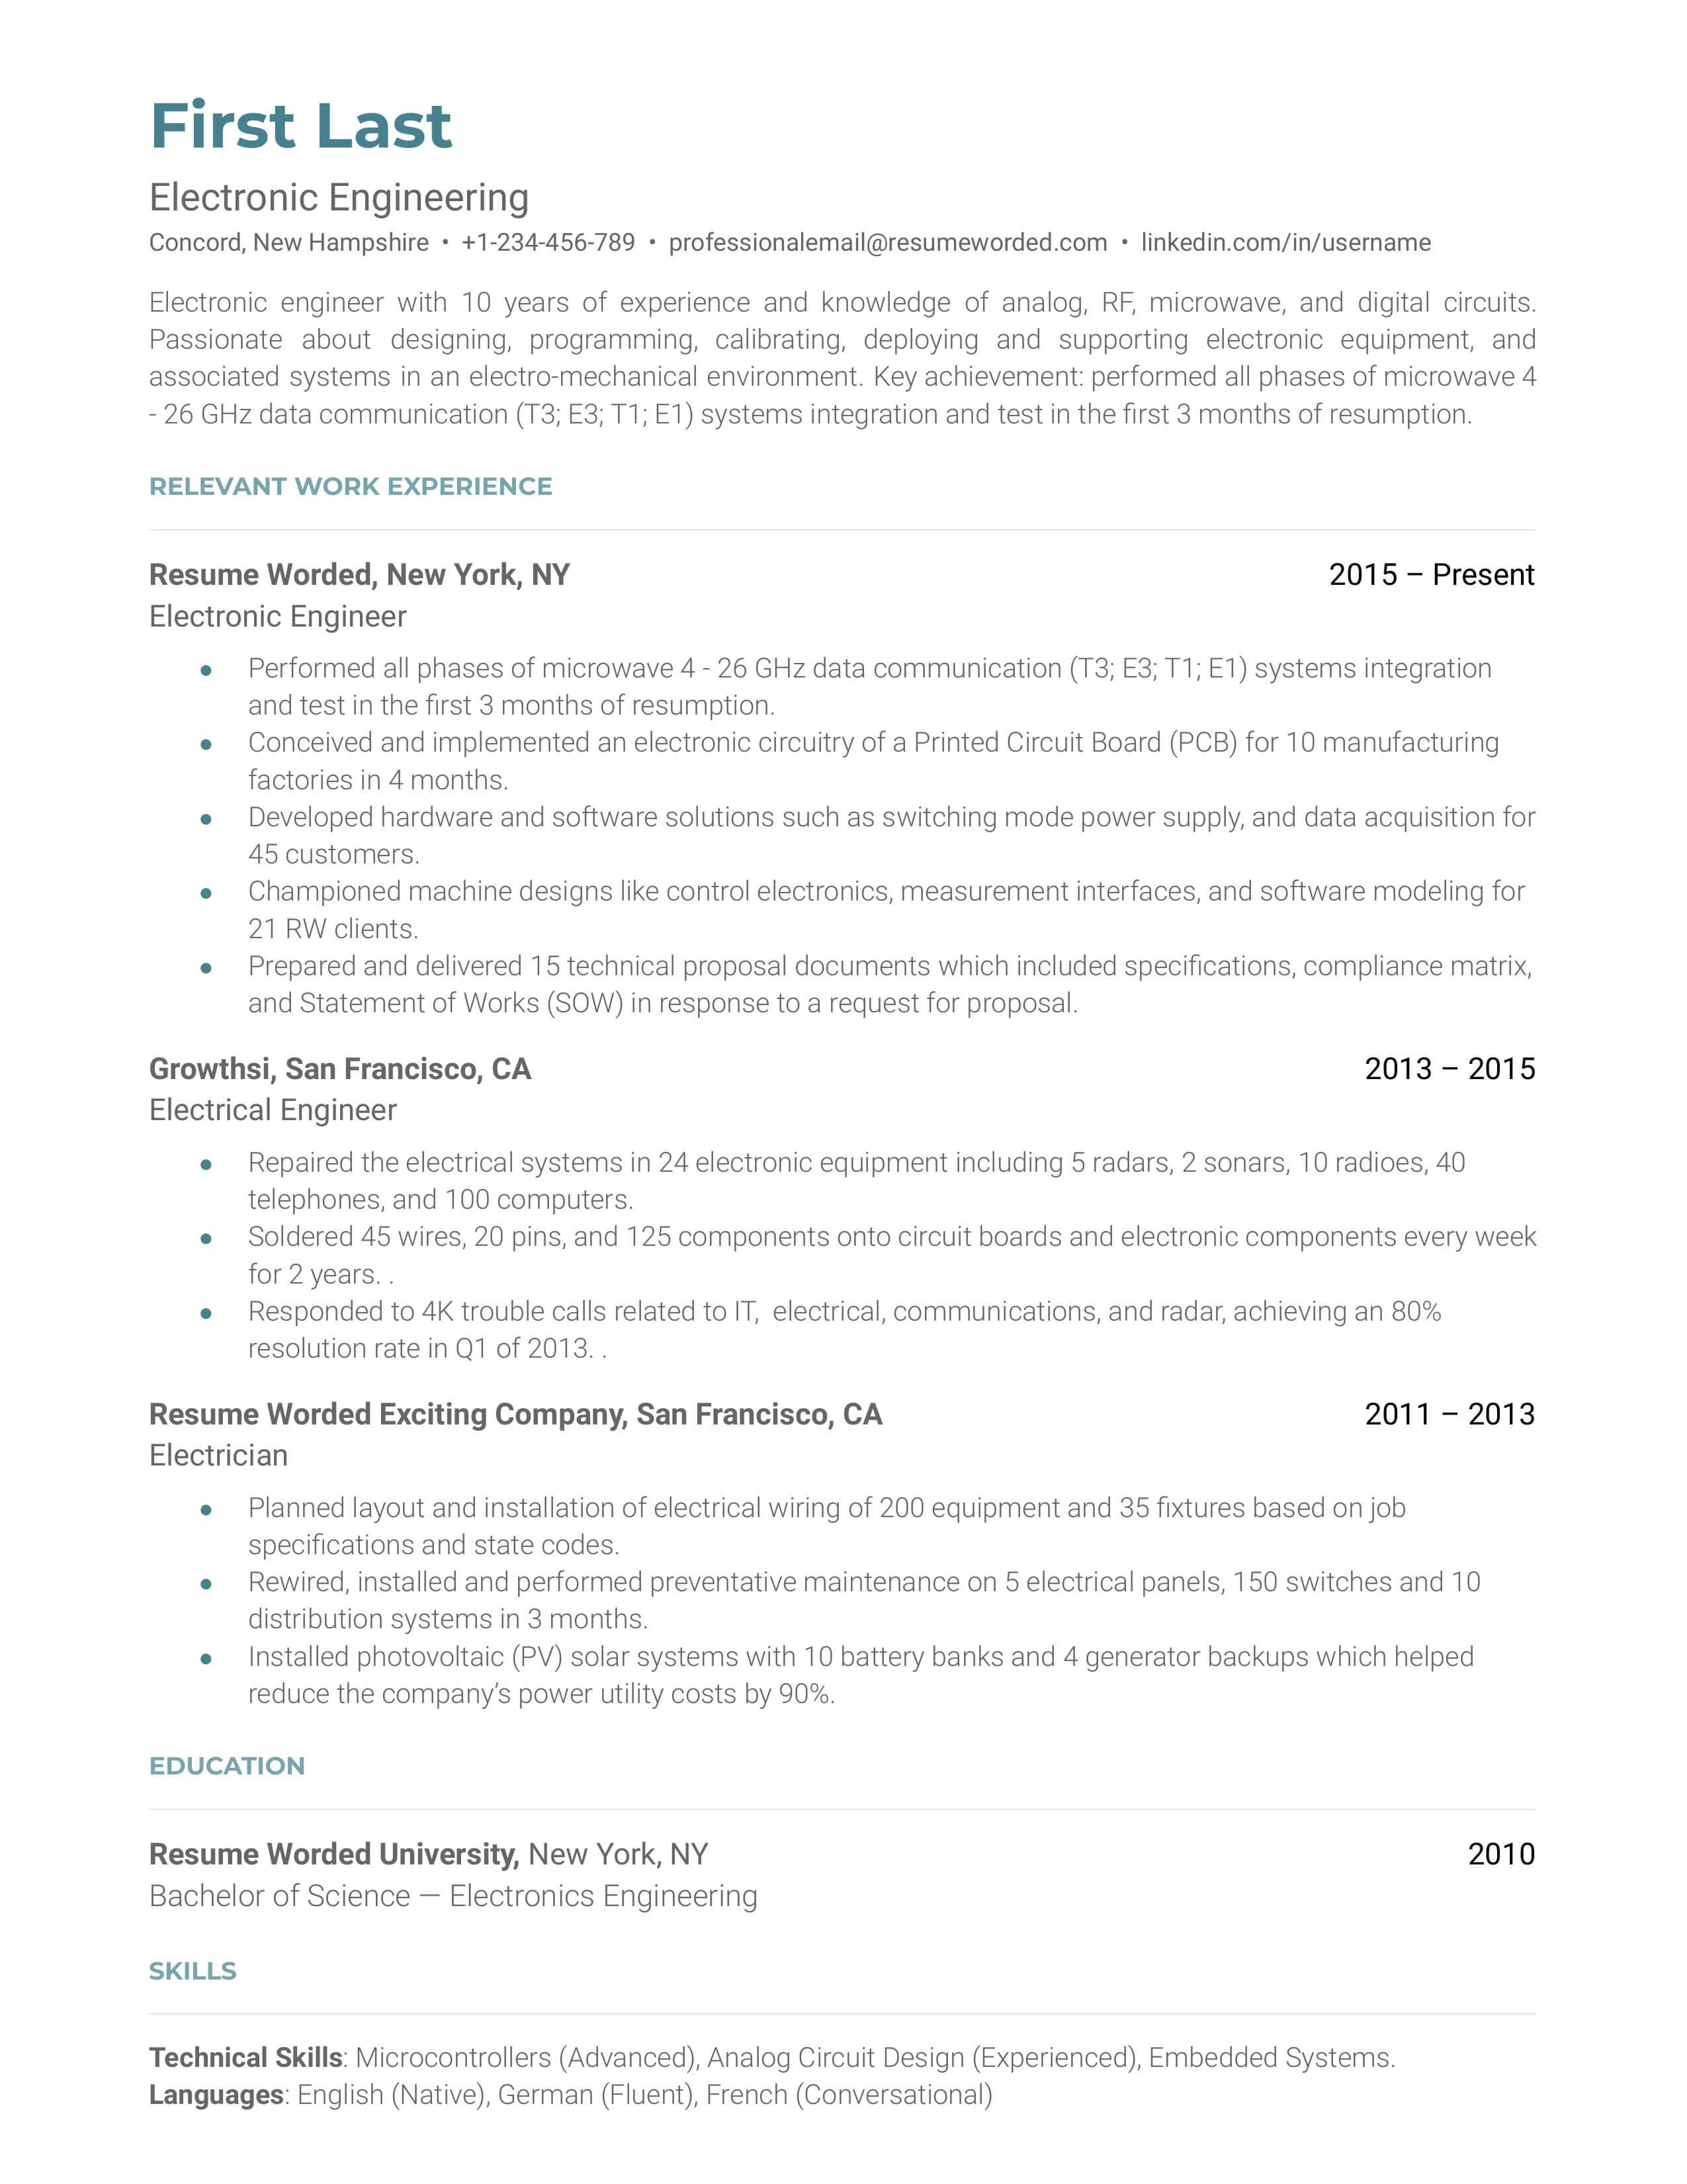 An electronic engineering resume sample that highlights the applicant's extensive experience and quantifiable success.